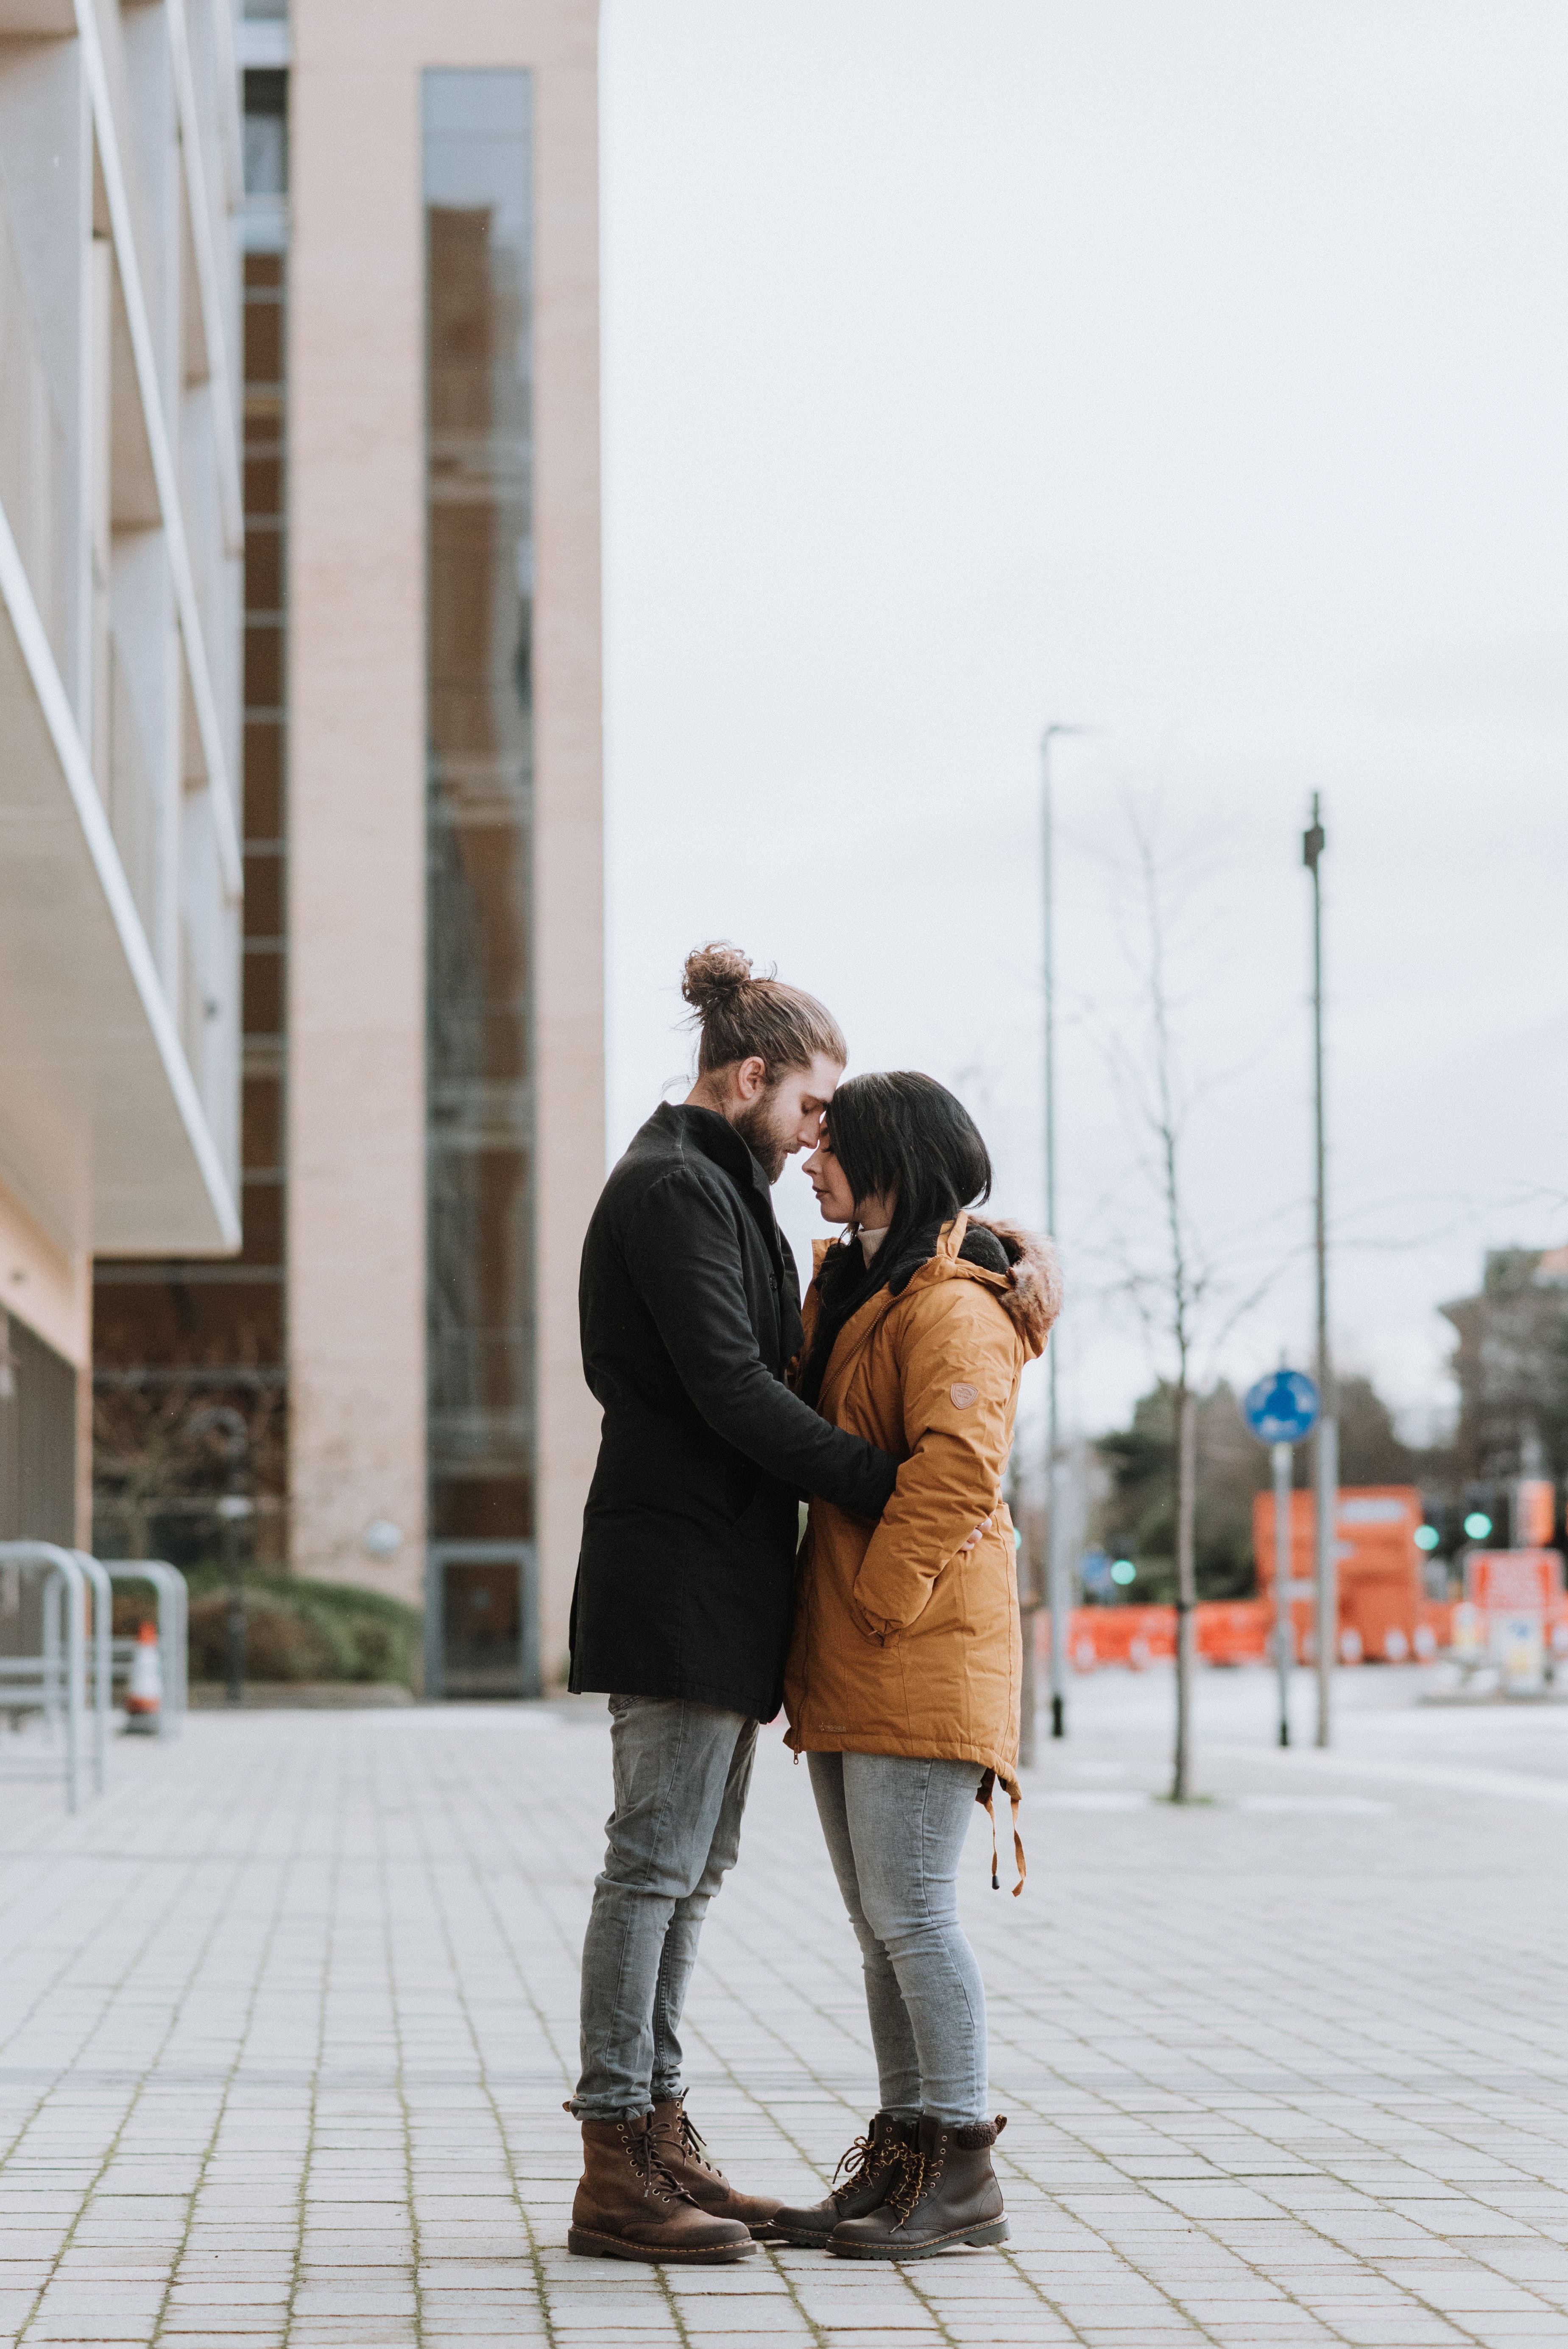 A couple placing their foreheads together. | Source: Pexels